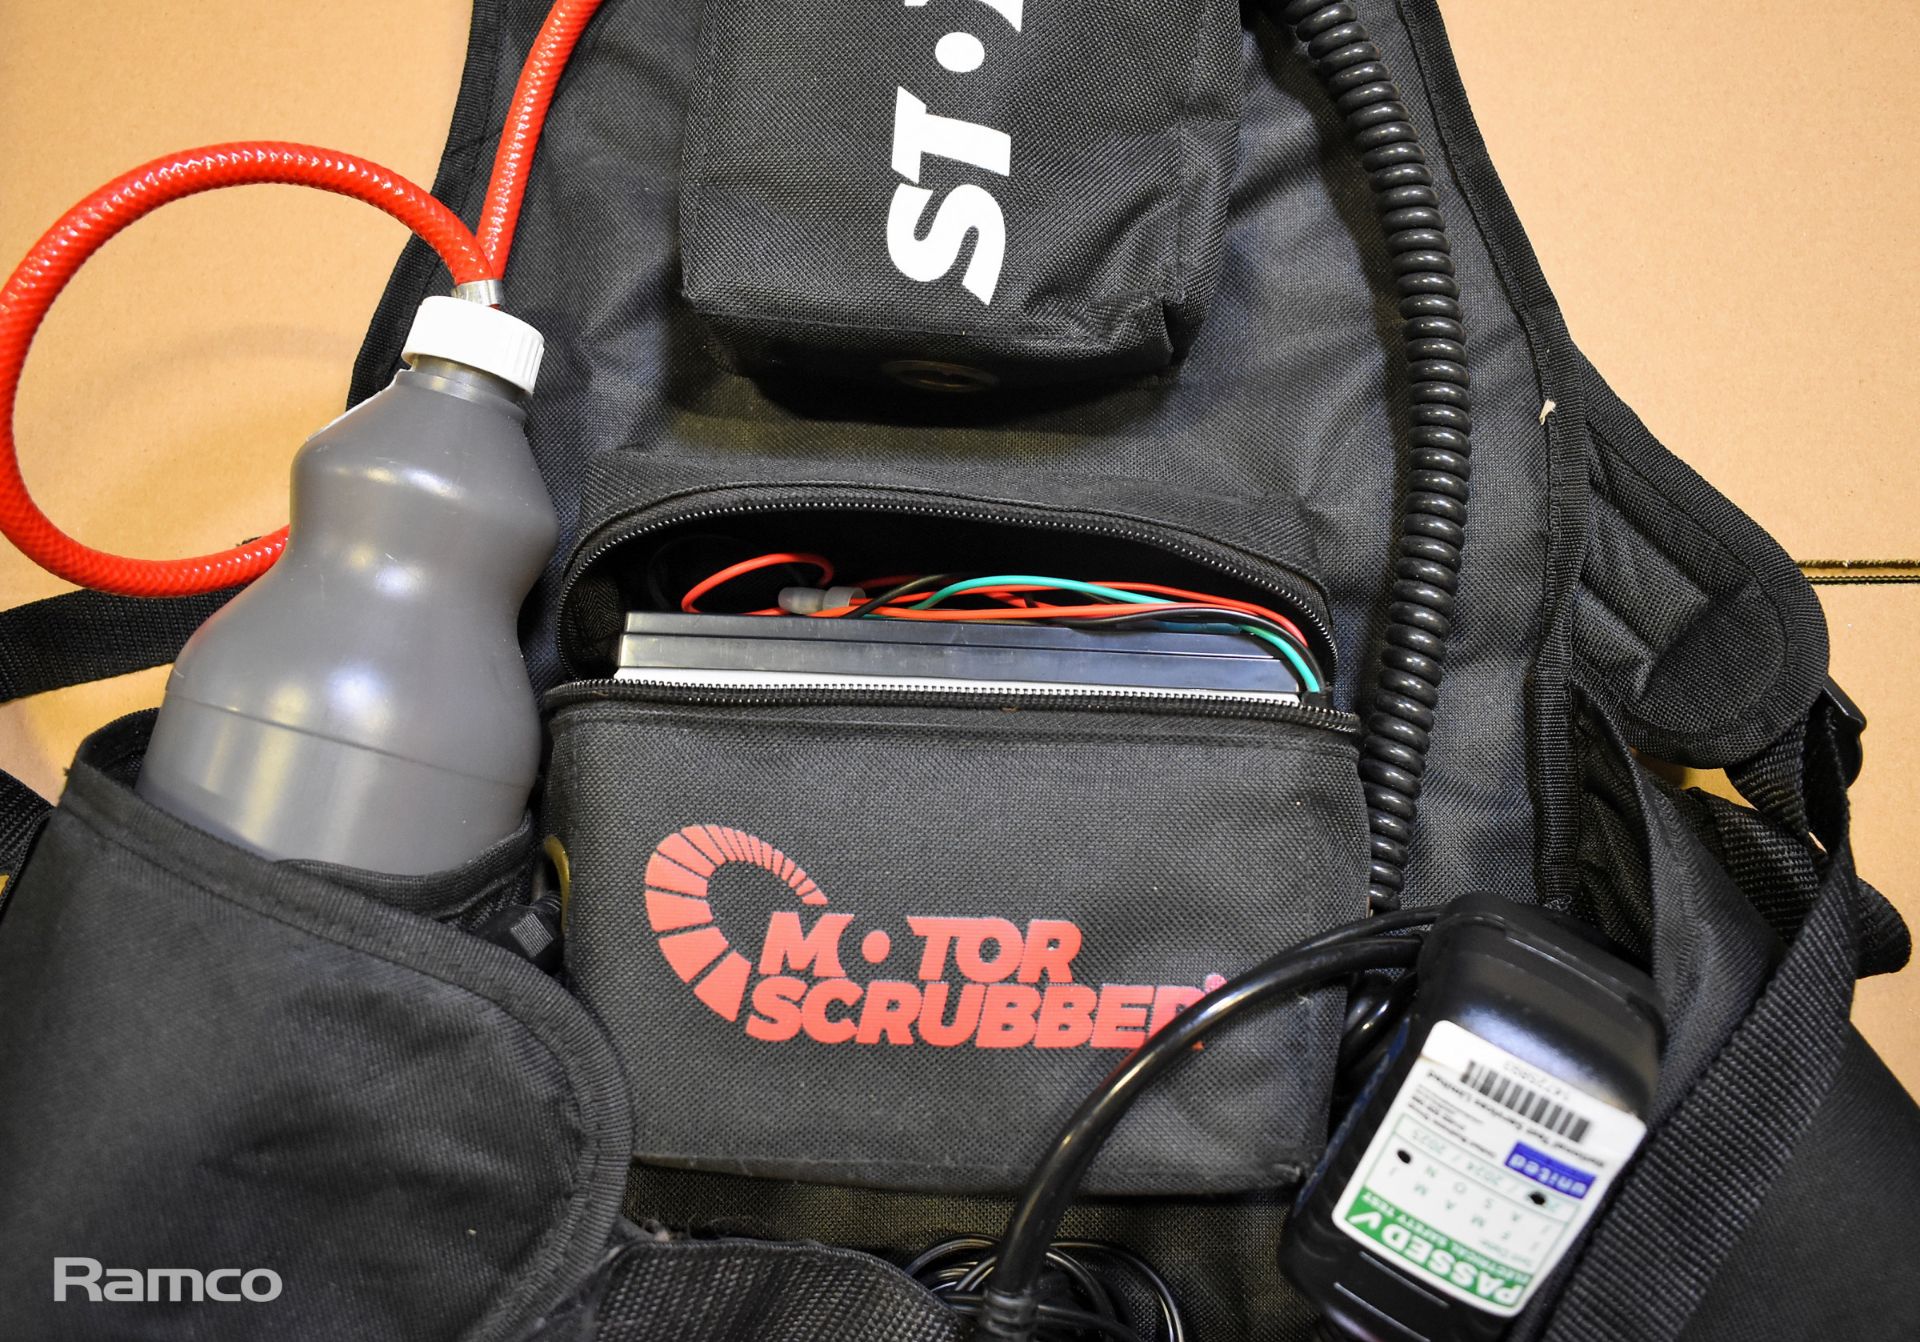 Storm Motorscrubber virucidal mister with backpack and rechargeable battery & more - Image 4 of 7